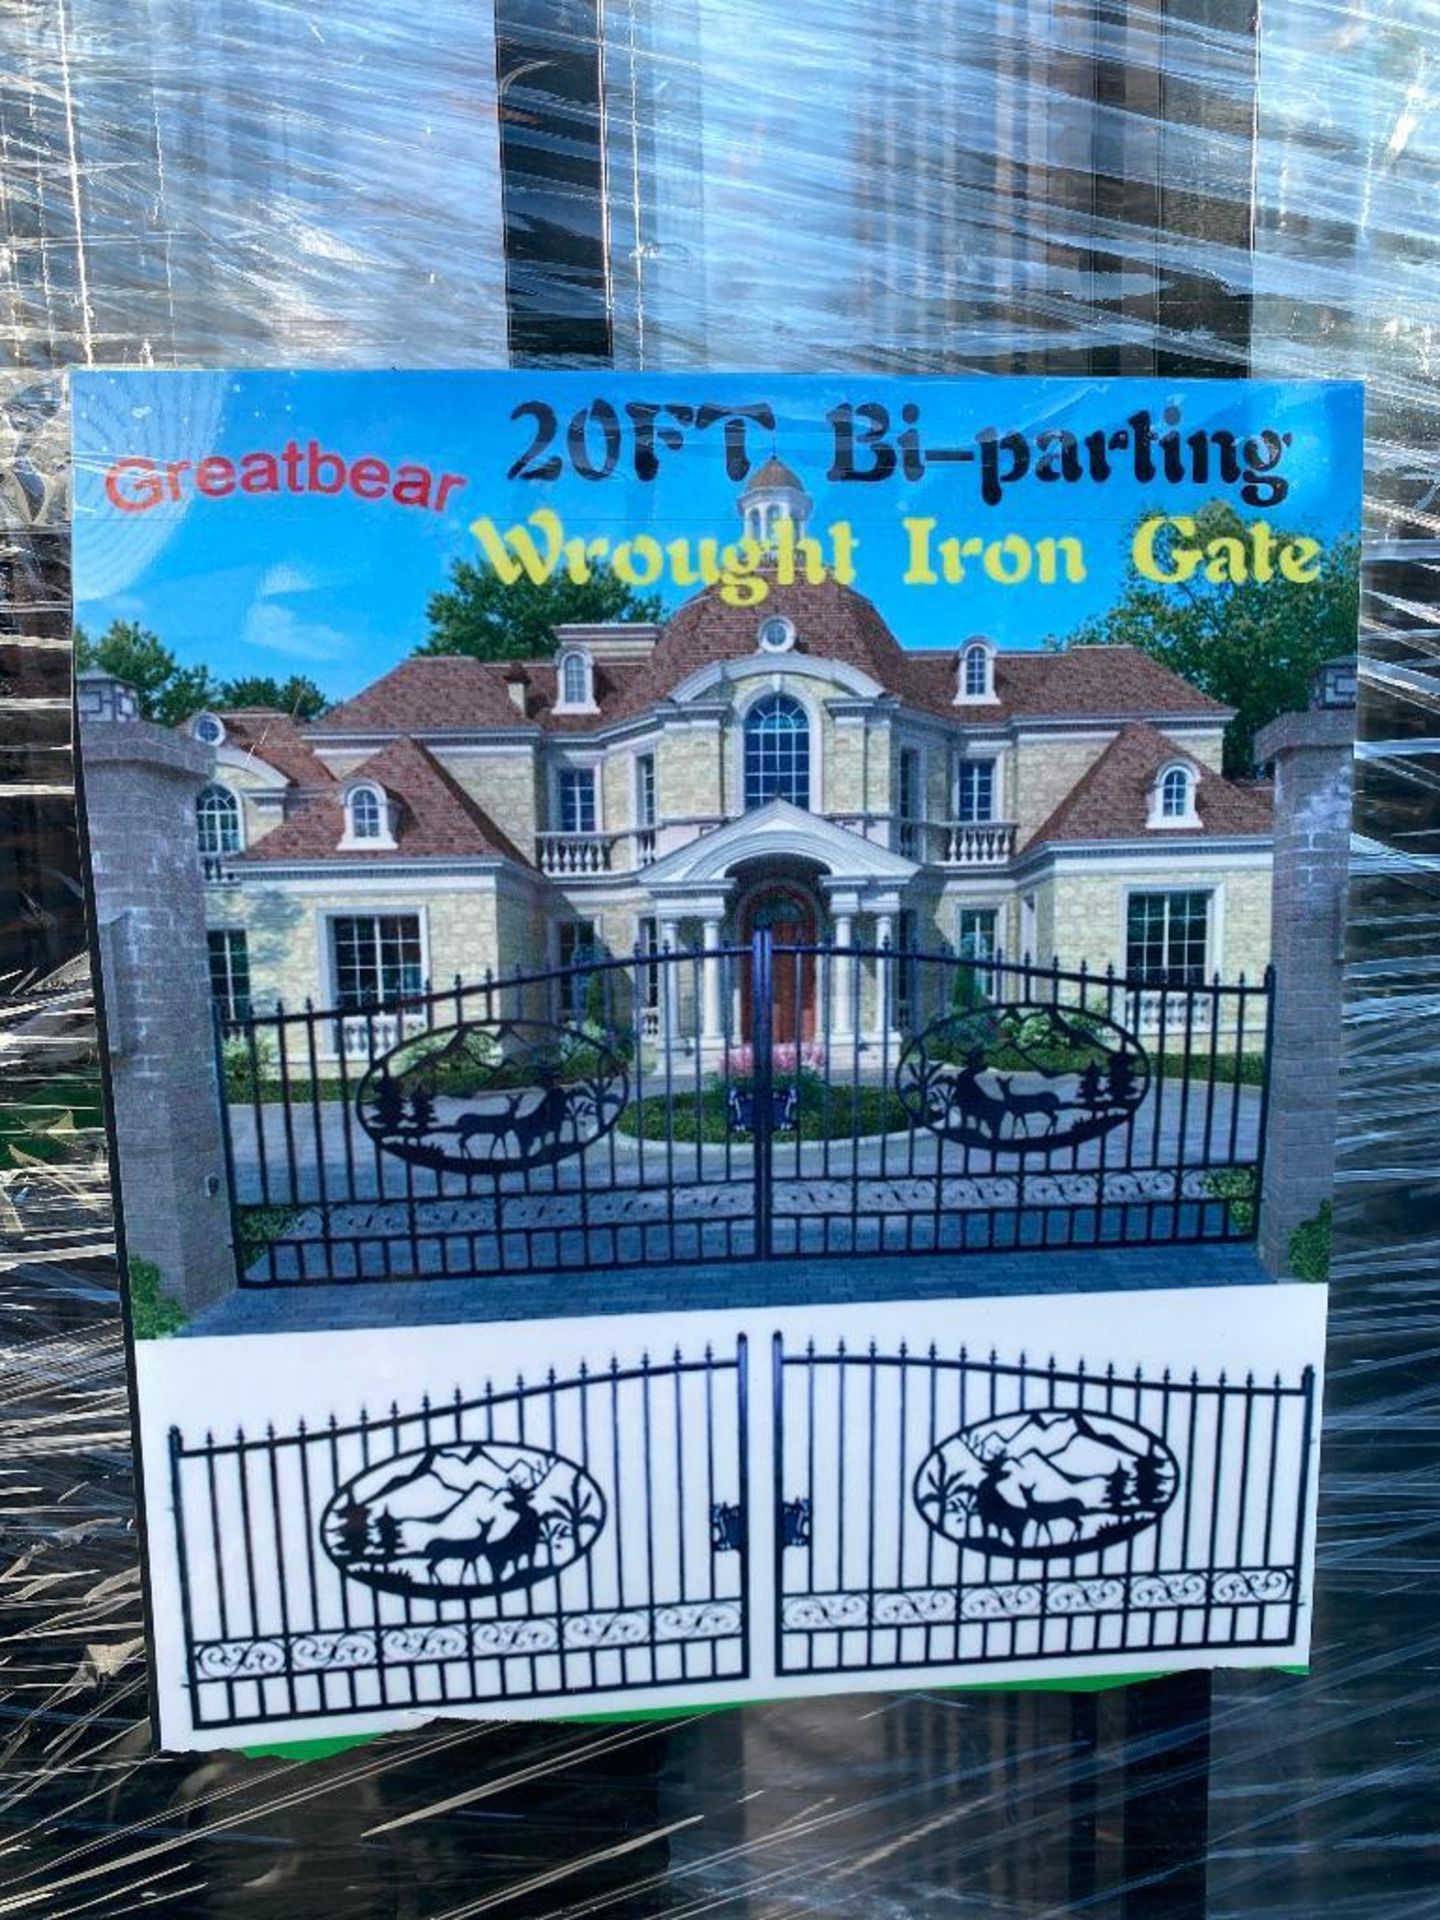 New Greatbear 20' Bi-Parting Wrought Iron Gate with Deer Design - Image 2 of 2